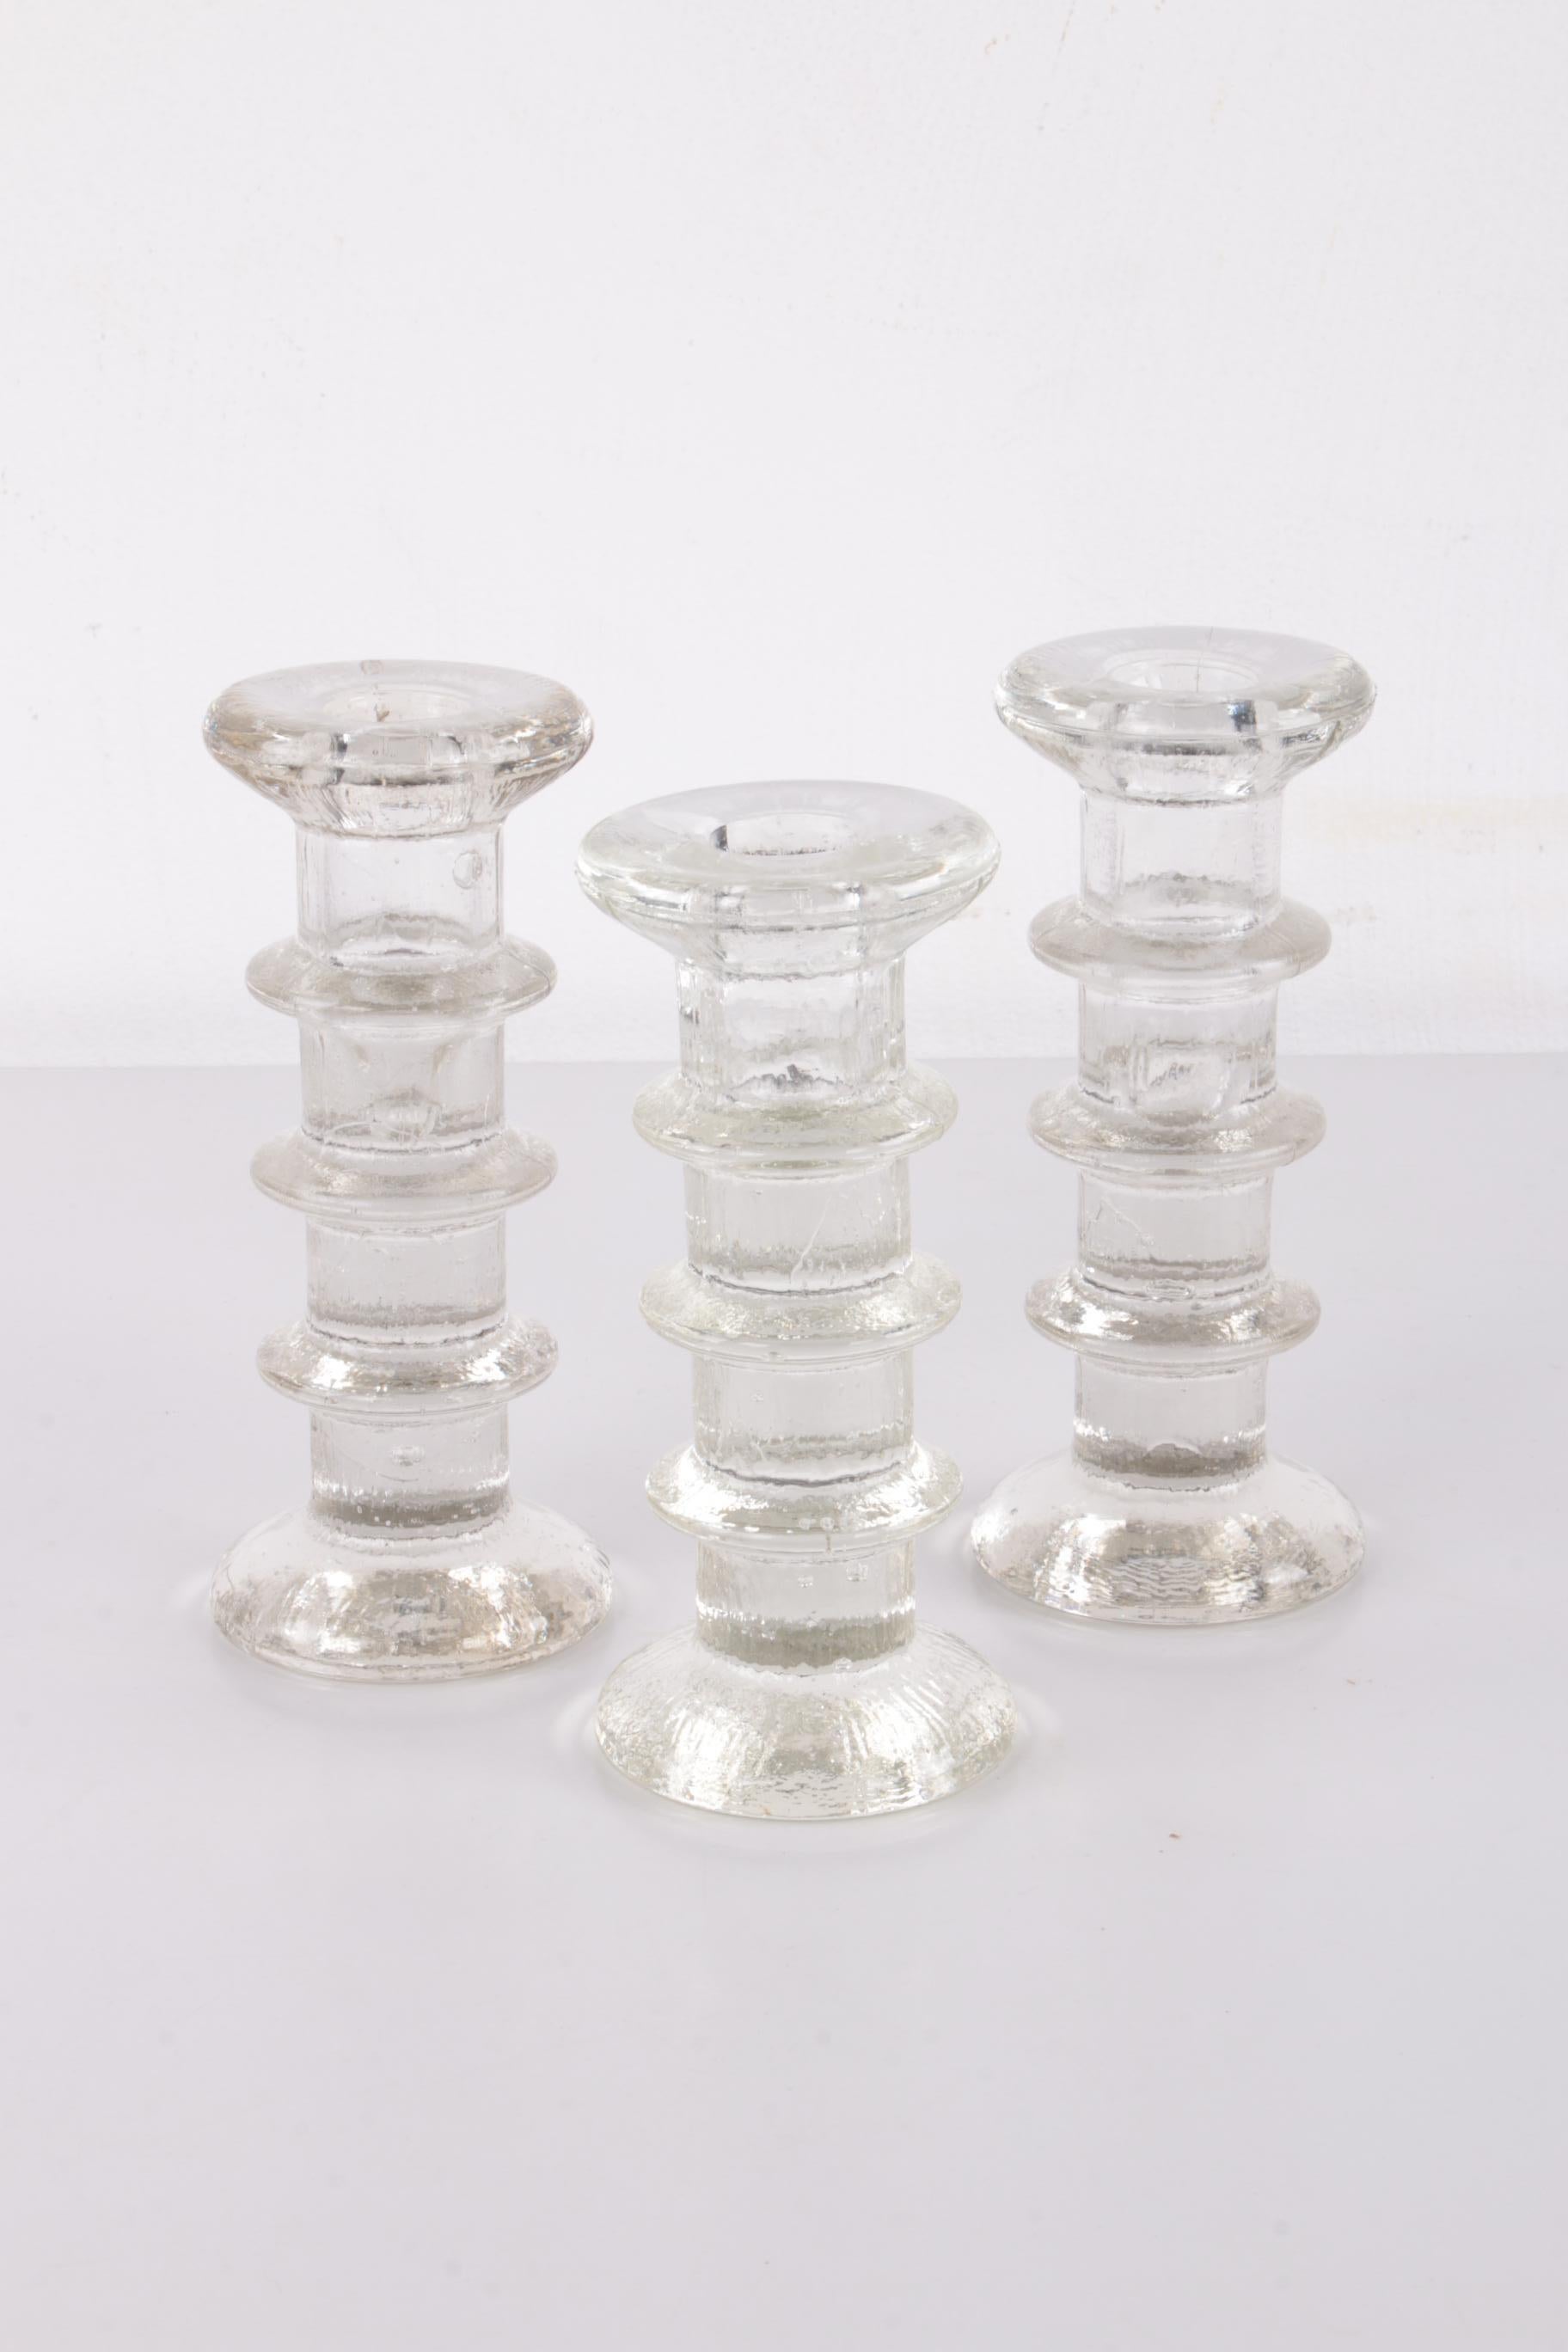 Vintage Set of 3 glass candlesticks Design by Staffan Gellerstedt 1960s

A beautiful set of 3 glass candlesticks from Scandinavia: candlestick/candle holder with multiple rings design by Staffan Gellerstedt made by Pukeberg 1966.

This large